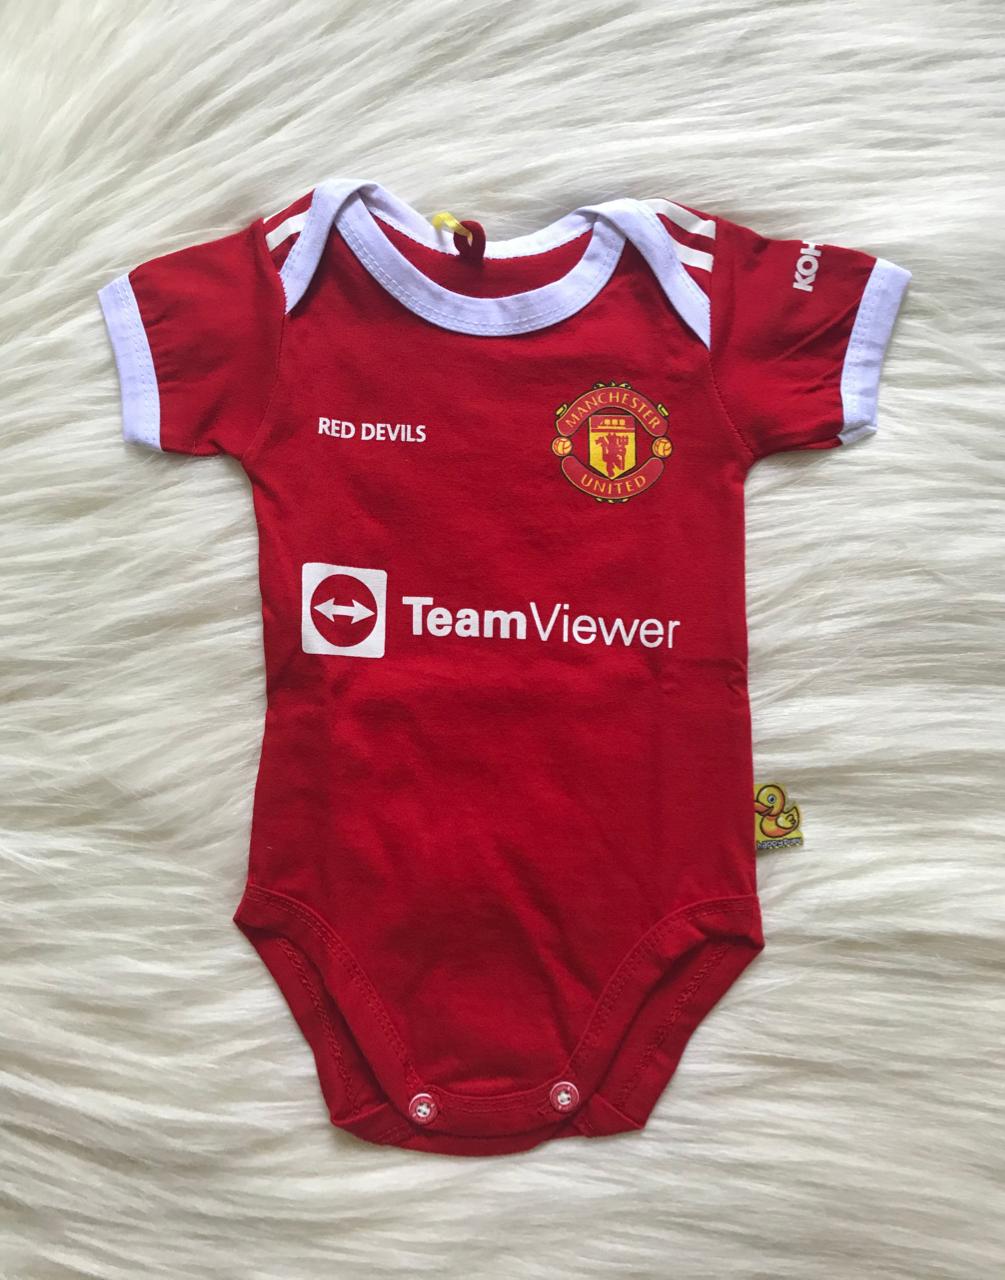 Melomoo Baby Football Jumper Manchester United Home Clothing Set